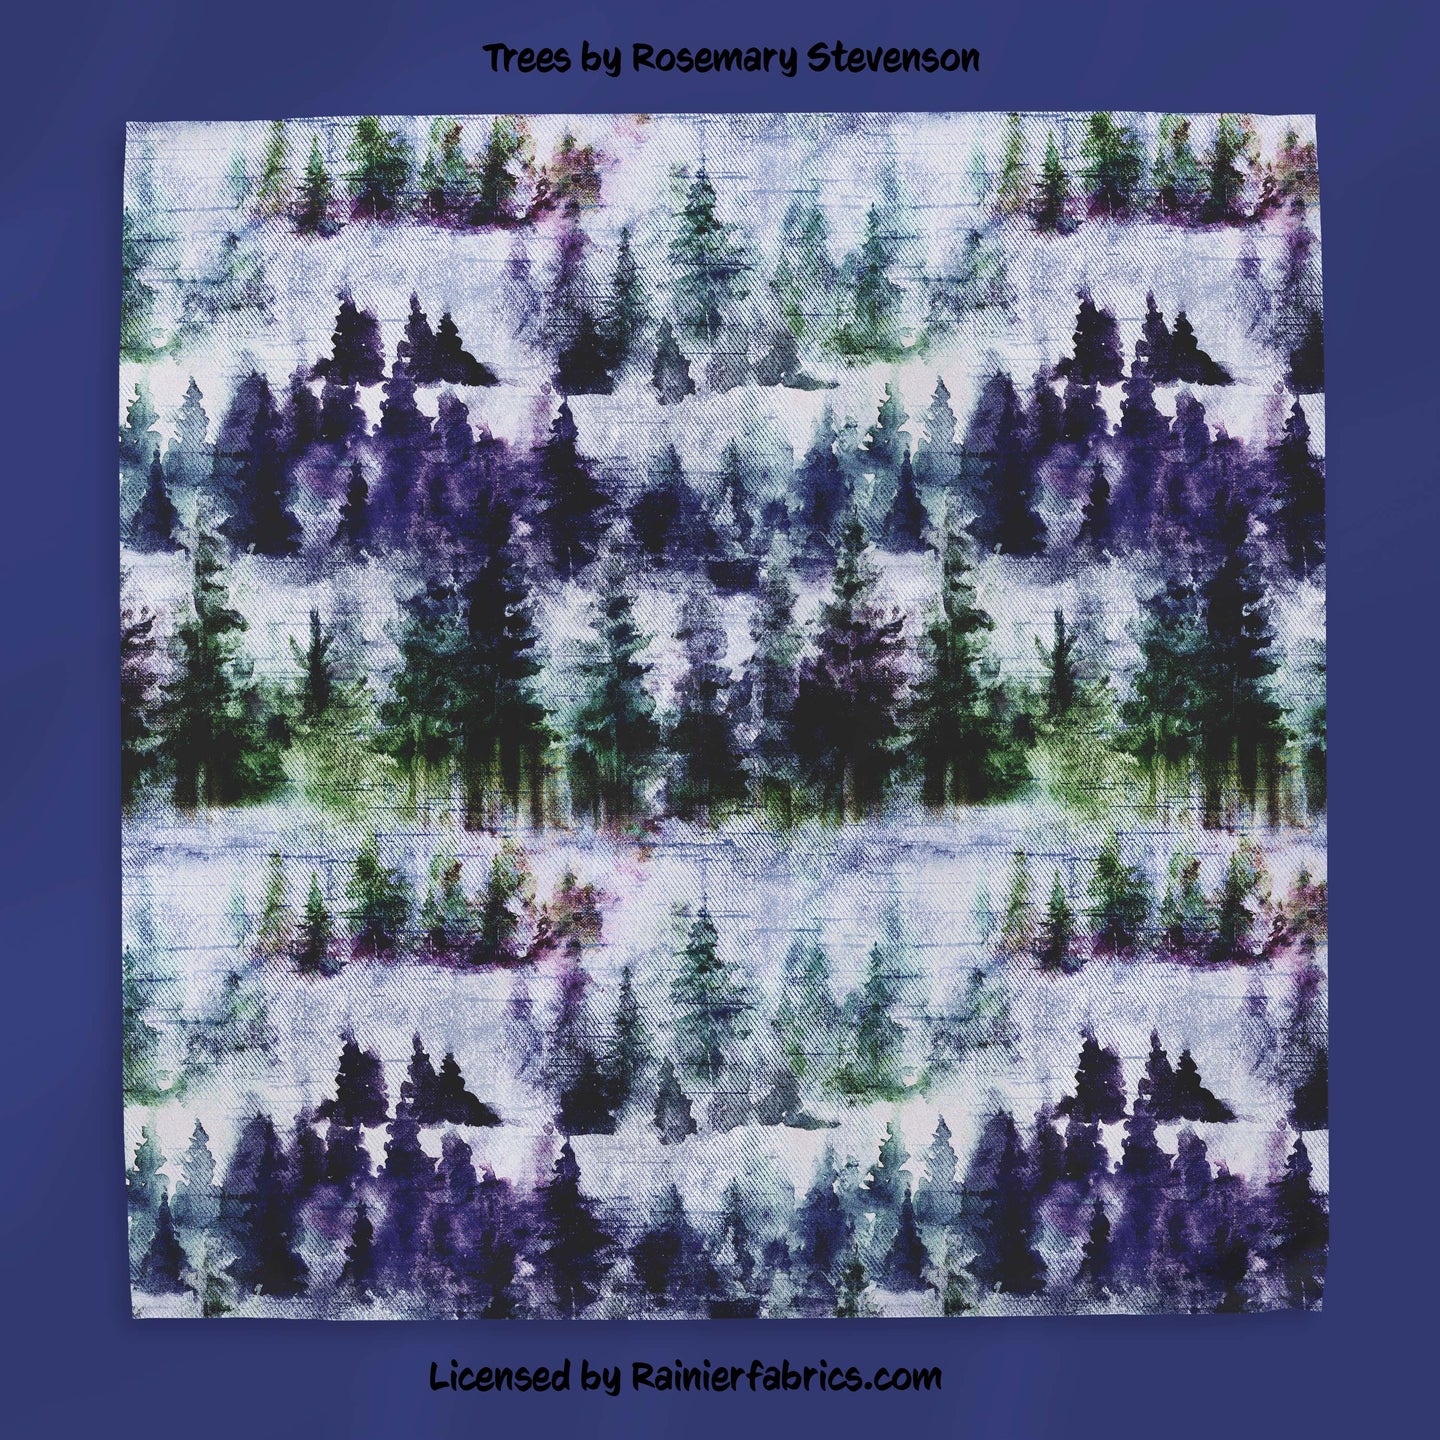 Trees by Rosemary Stevenson - TAT 2-5 Days (Turn around time) - Order by 1/2 yard; Description of bases below